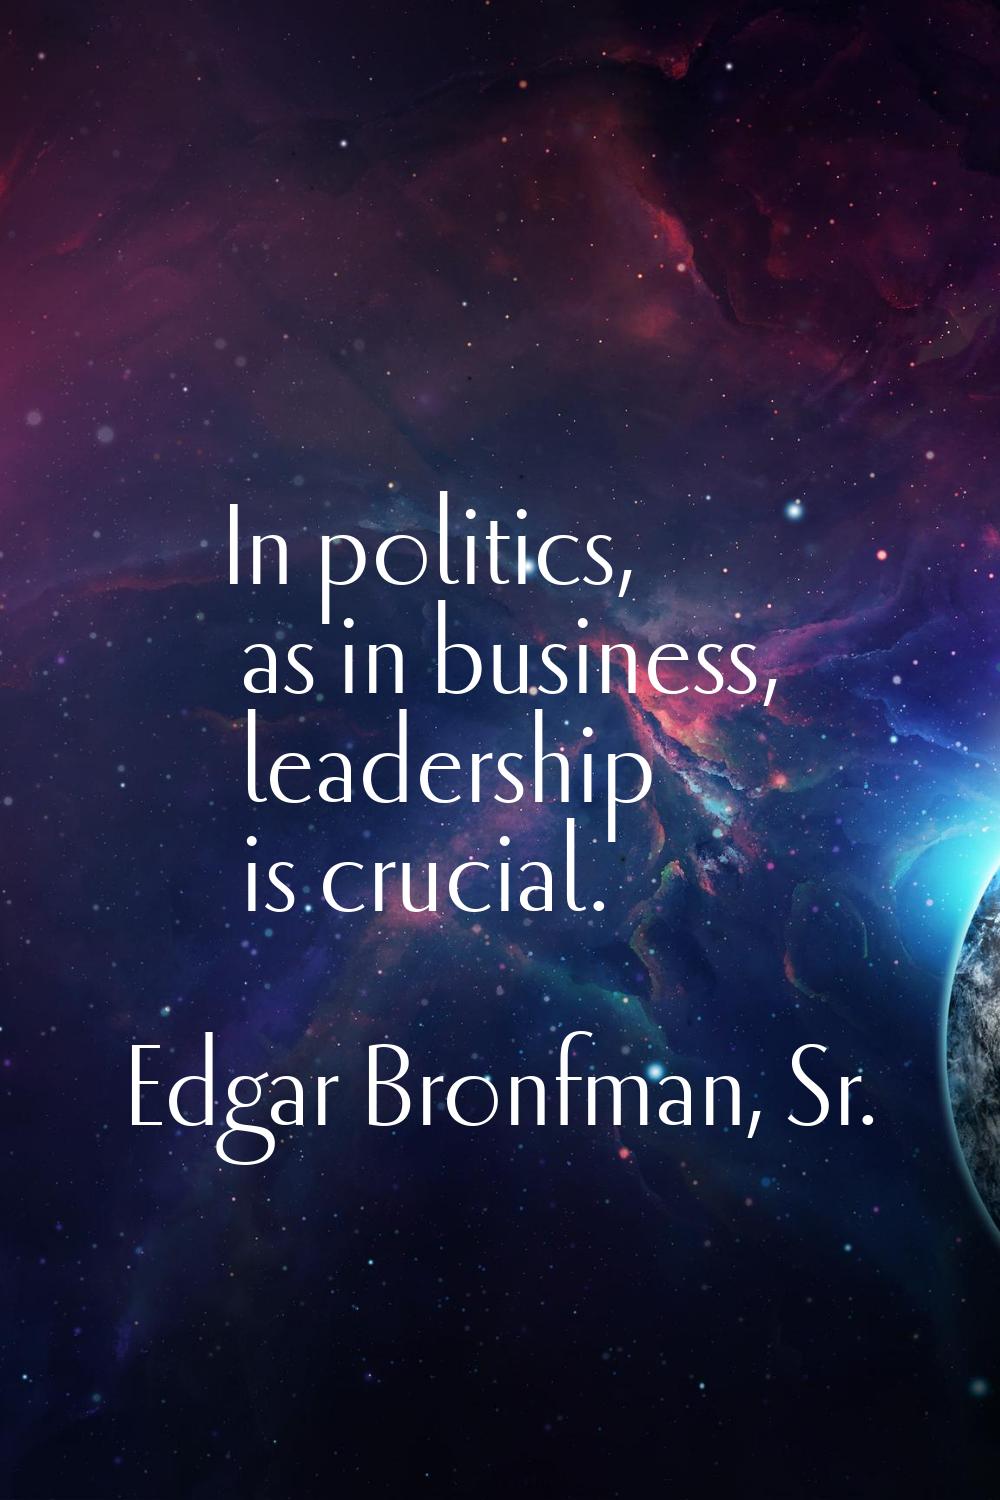 In politics, as in business, leadership is crucial.